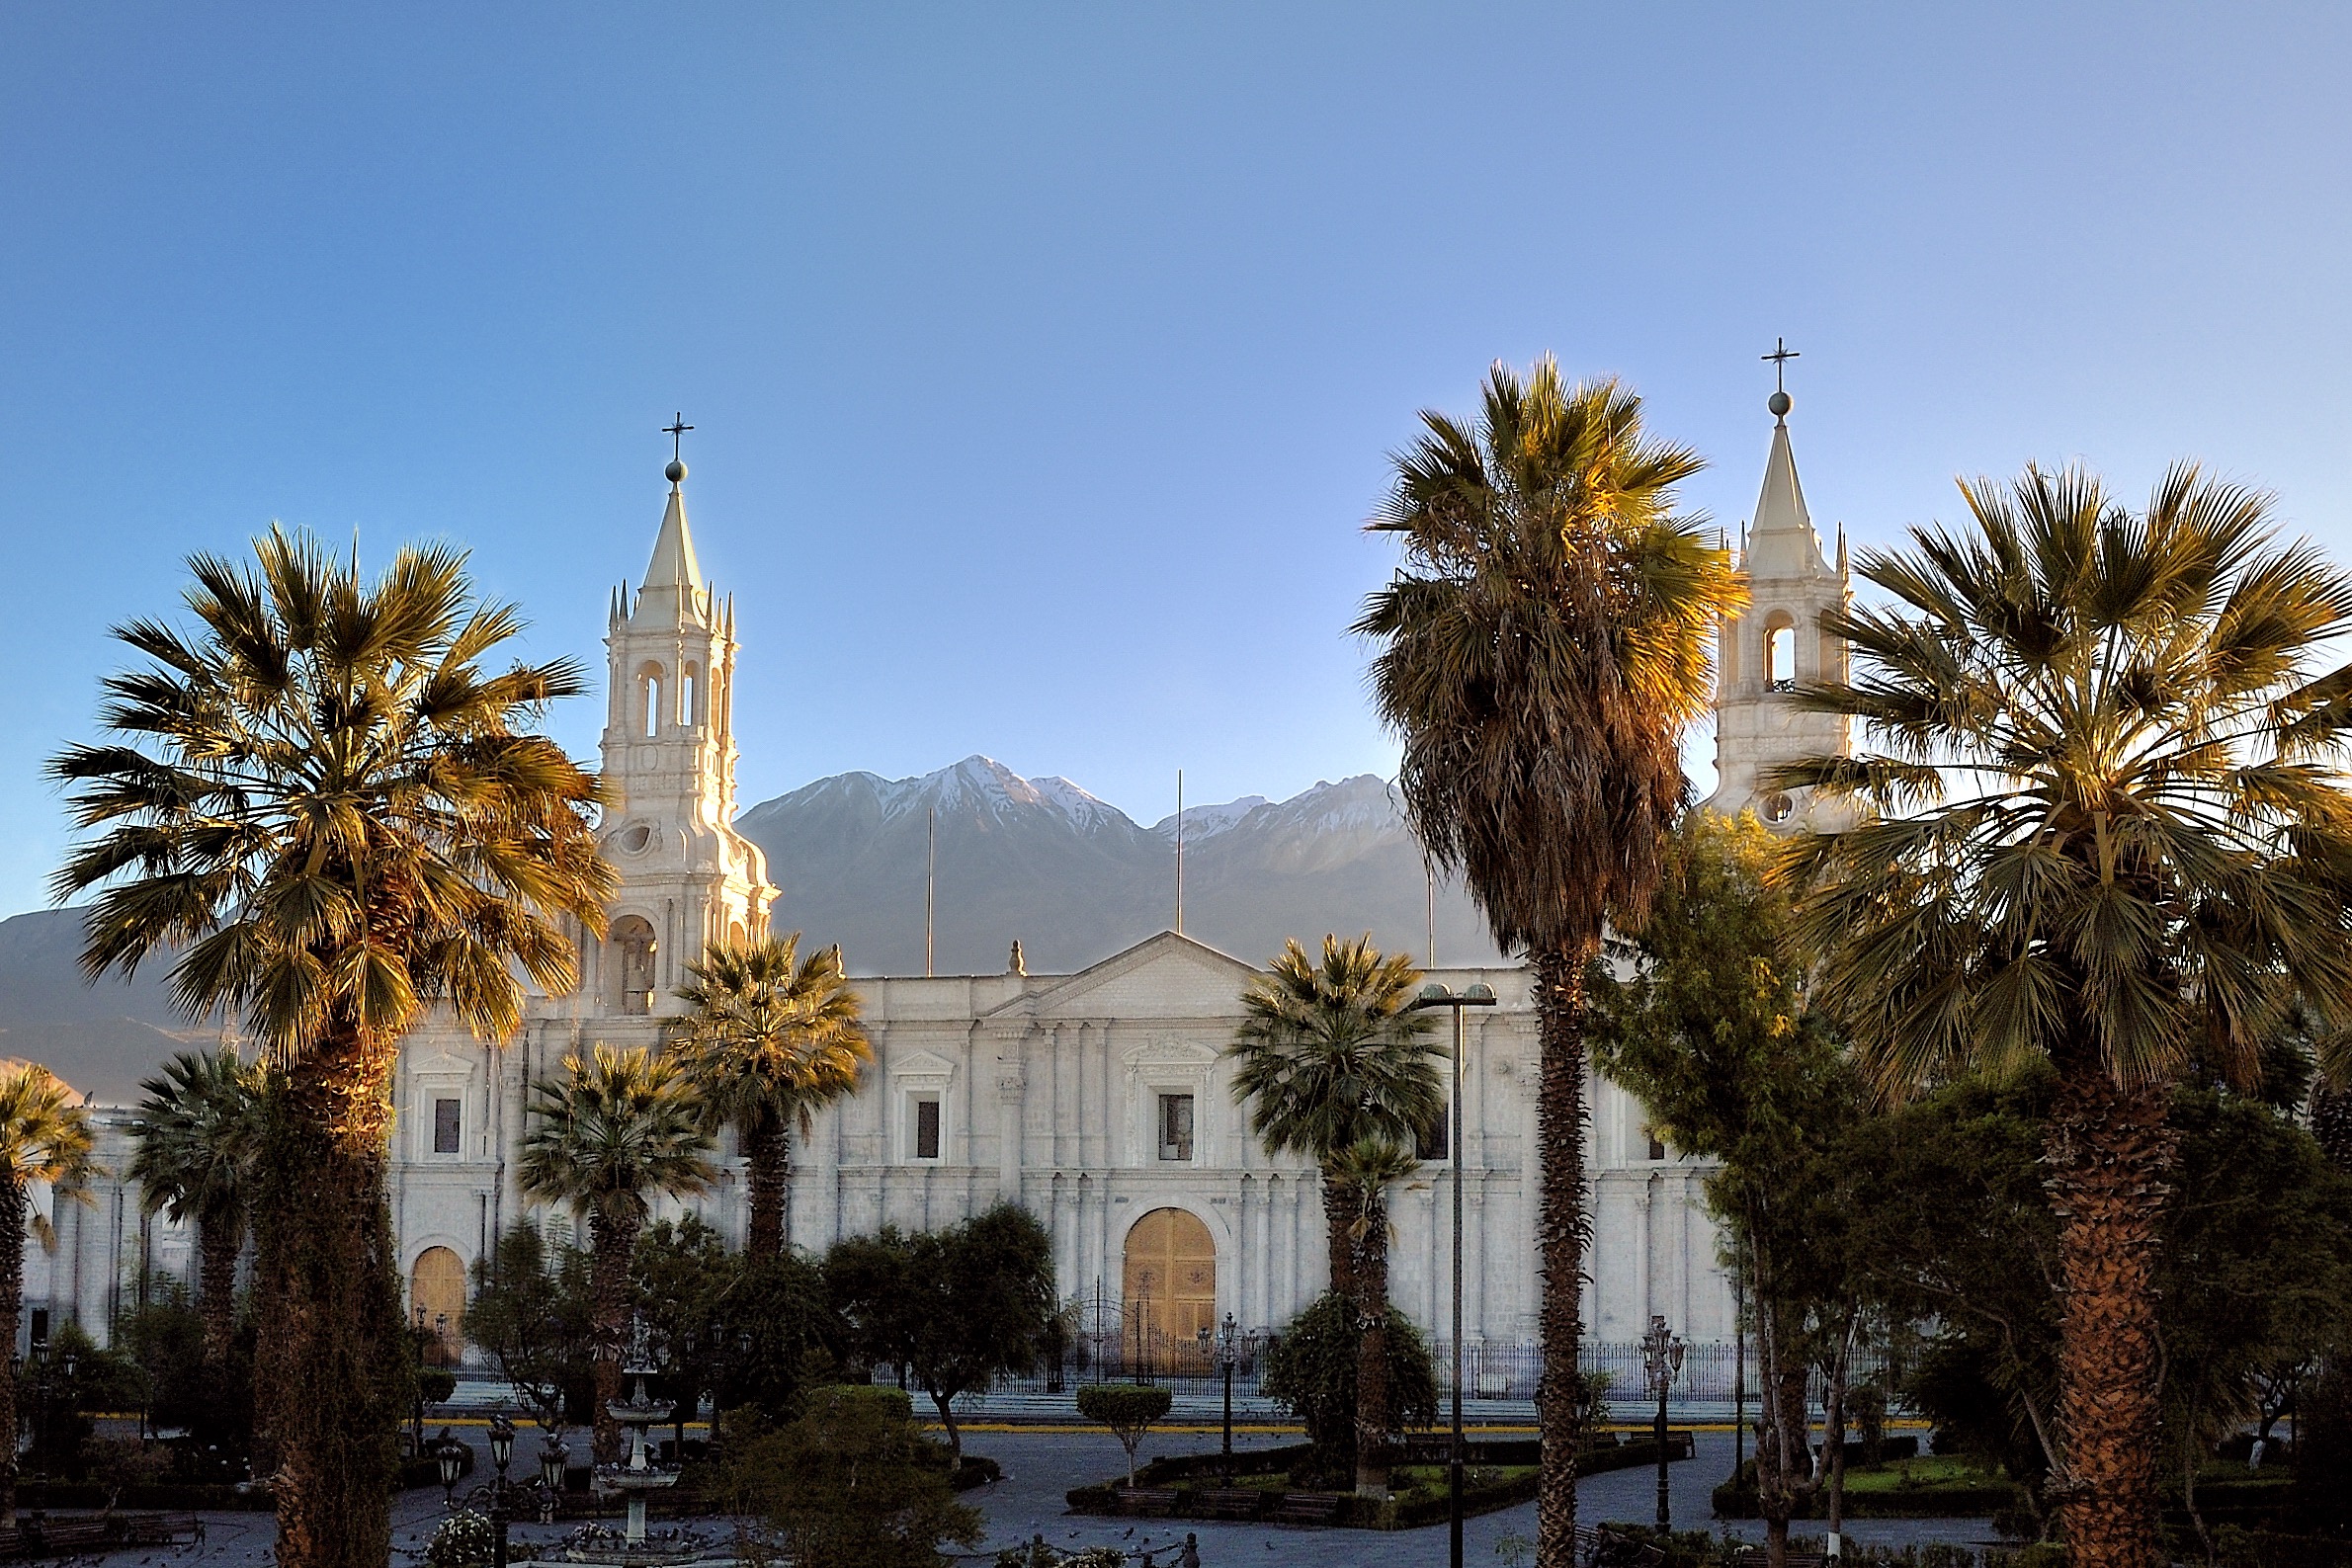 Arequipa Basilica Cathedral and Andes Mountains at daybreak. Photo by Paul Hedquist.